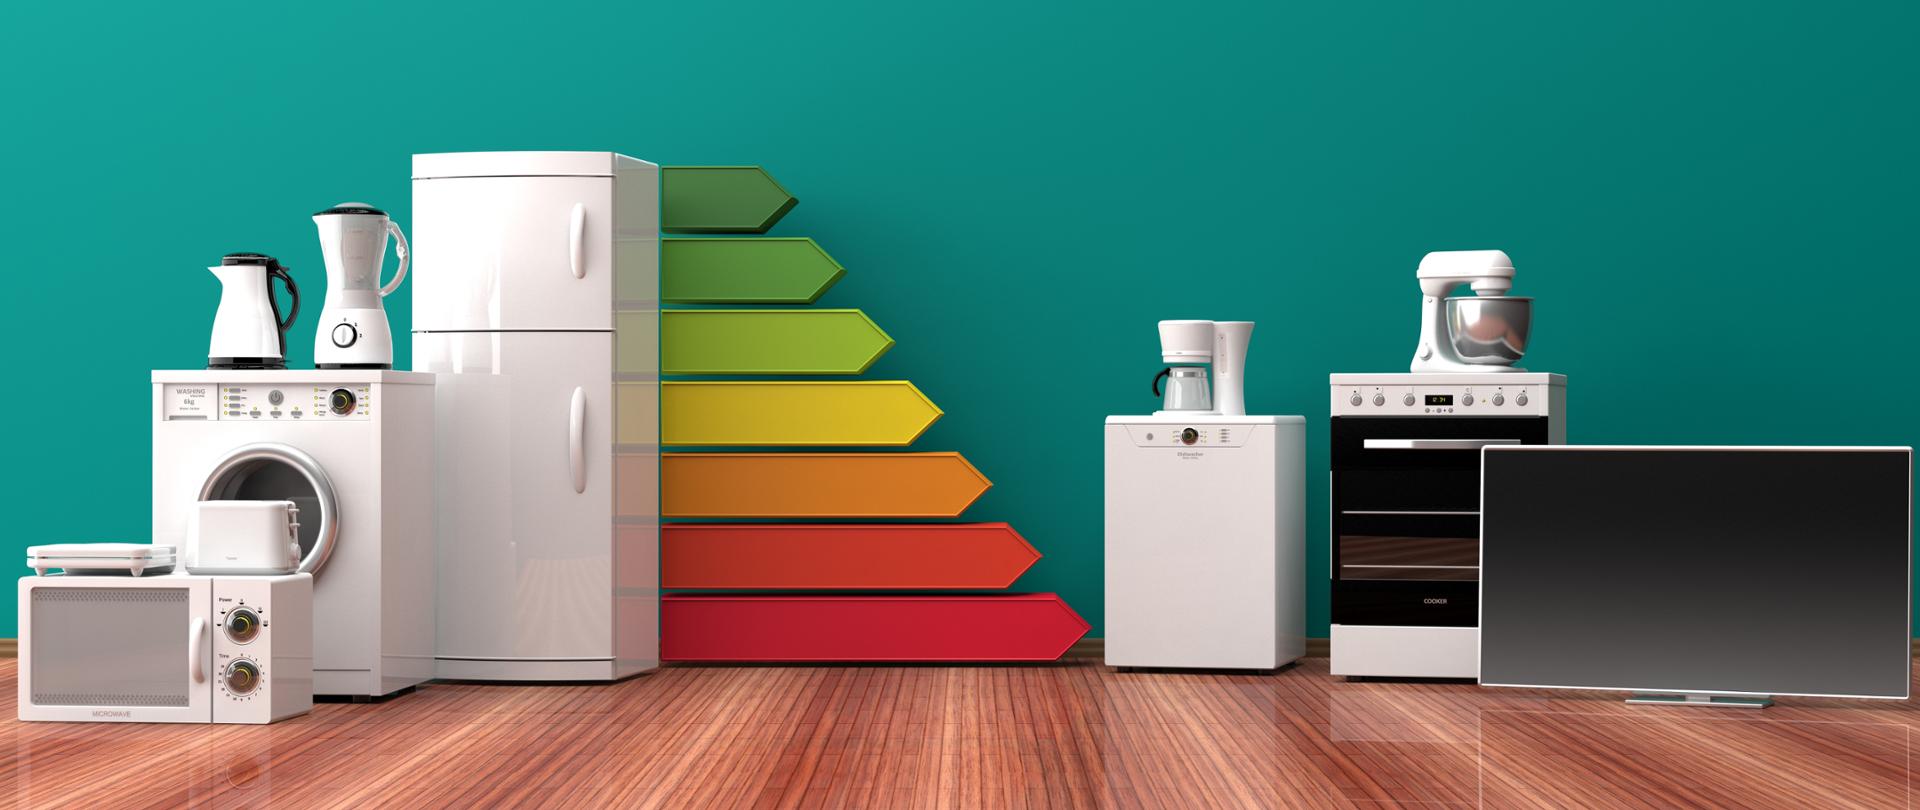 Home appliances and energy efficiency ranking. 3d illustration